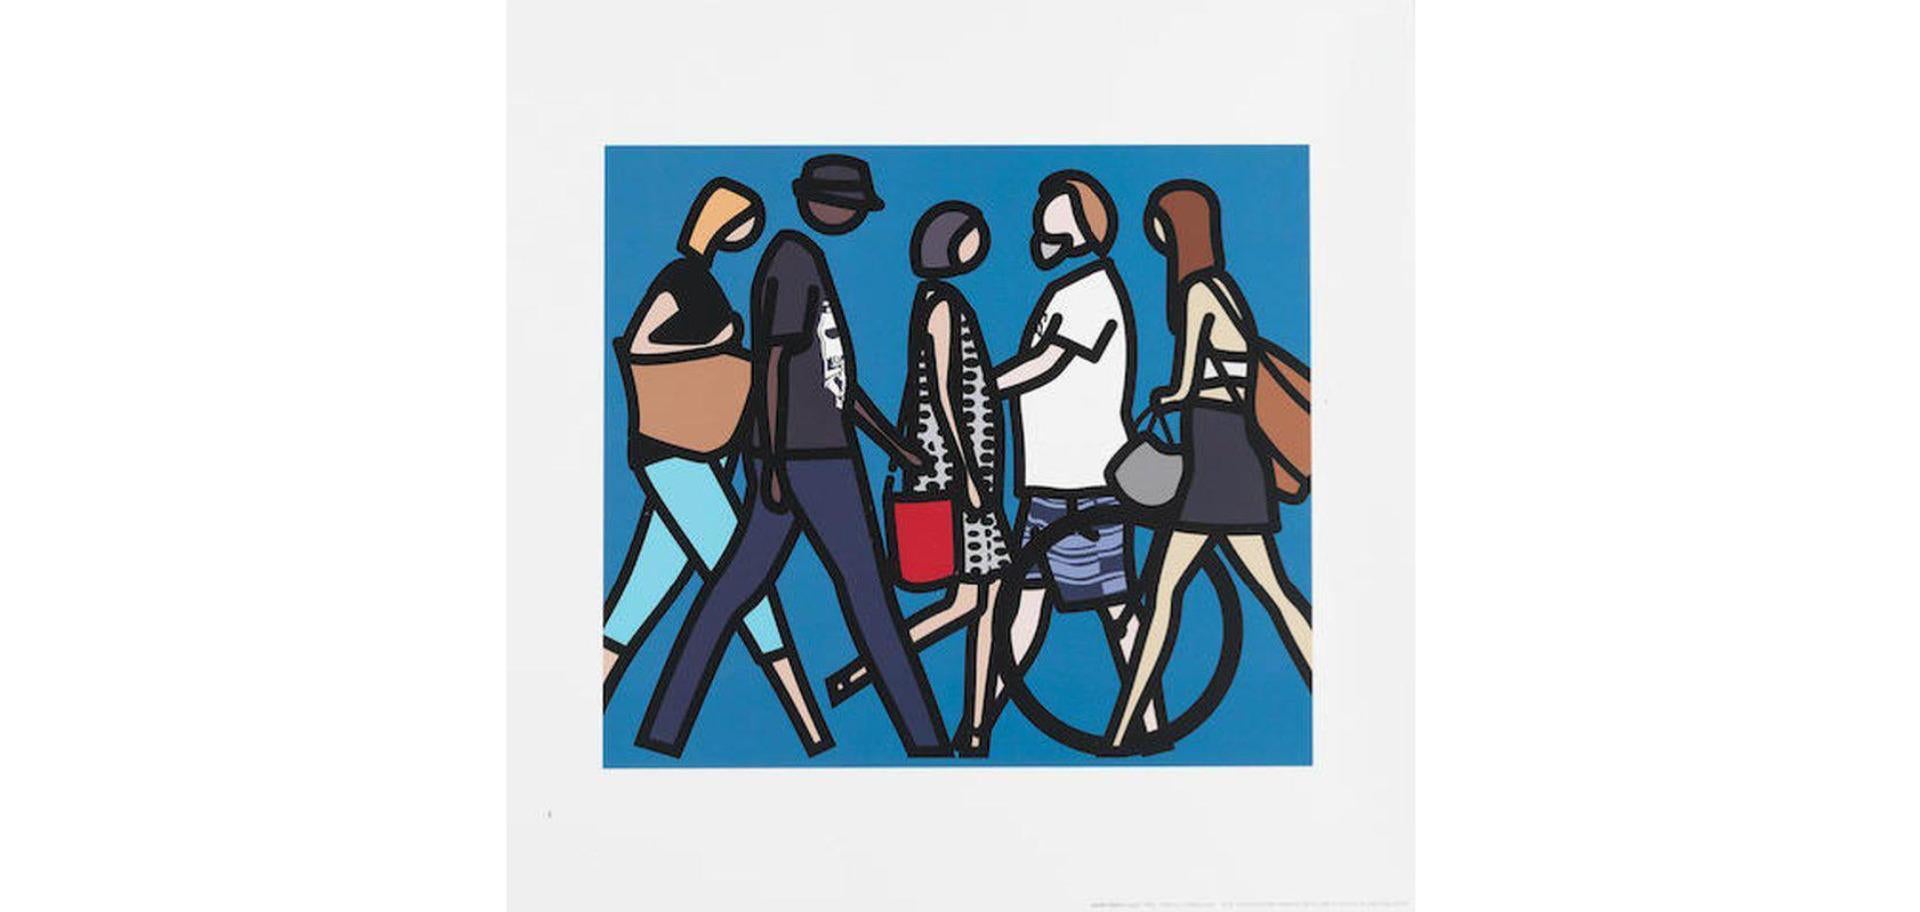 Walking in Melbourne, 1, Screenprint in Colours on Wove, 2018

This piece is from Opie's 'Walking in Melbourne' series, which was produced in 2018 and co-published by the artist's studio and the National Gallery of Victoria (Melbourne). Simple yet